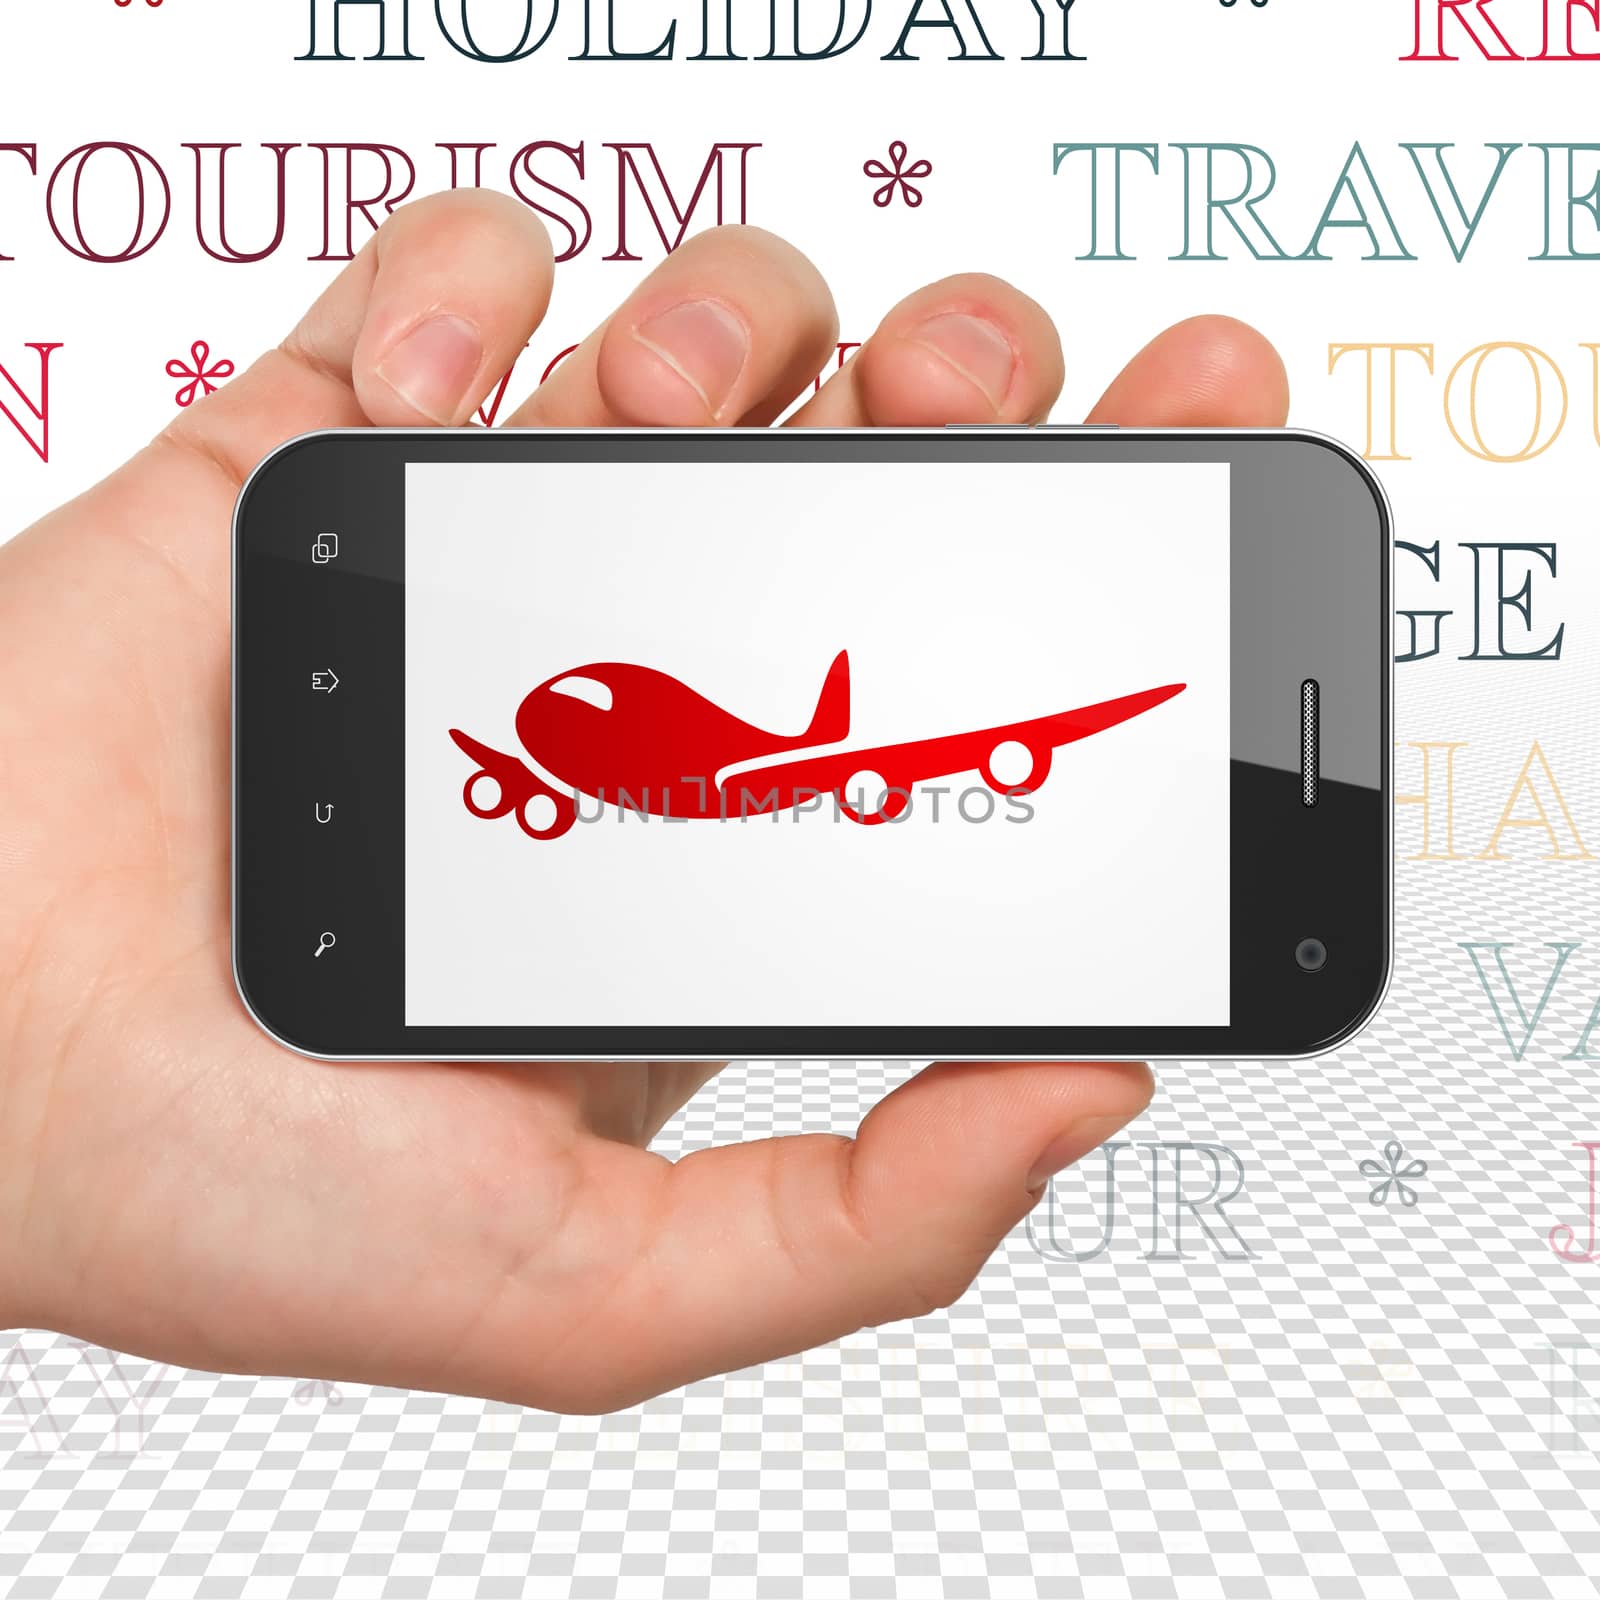 Tourism concept: Hand Holding Smartphone with  red Airplane icon on display,  Tag Cloud background, 3D rendering